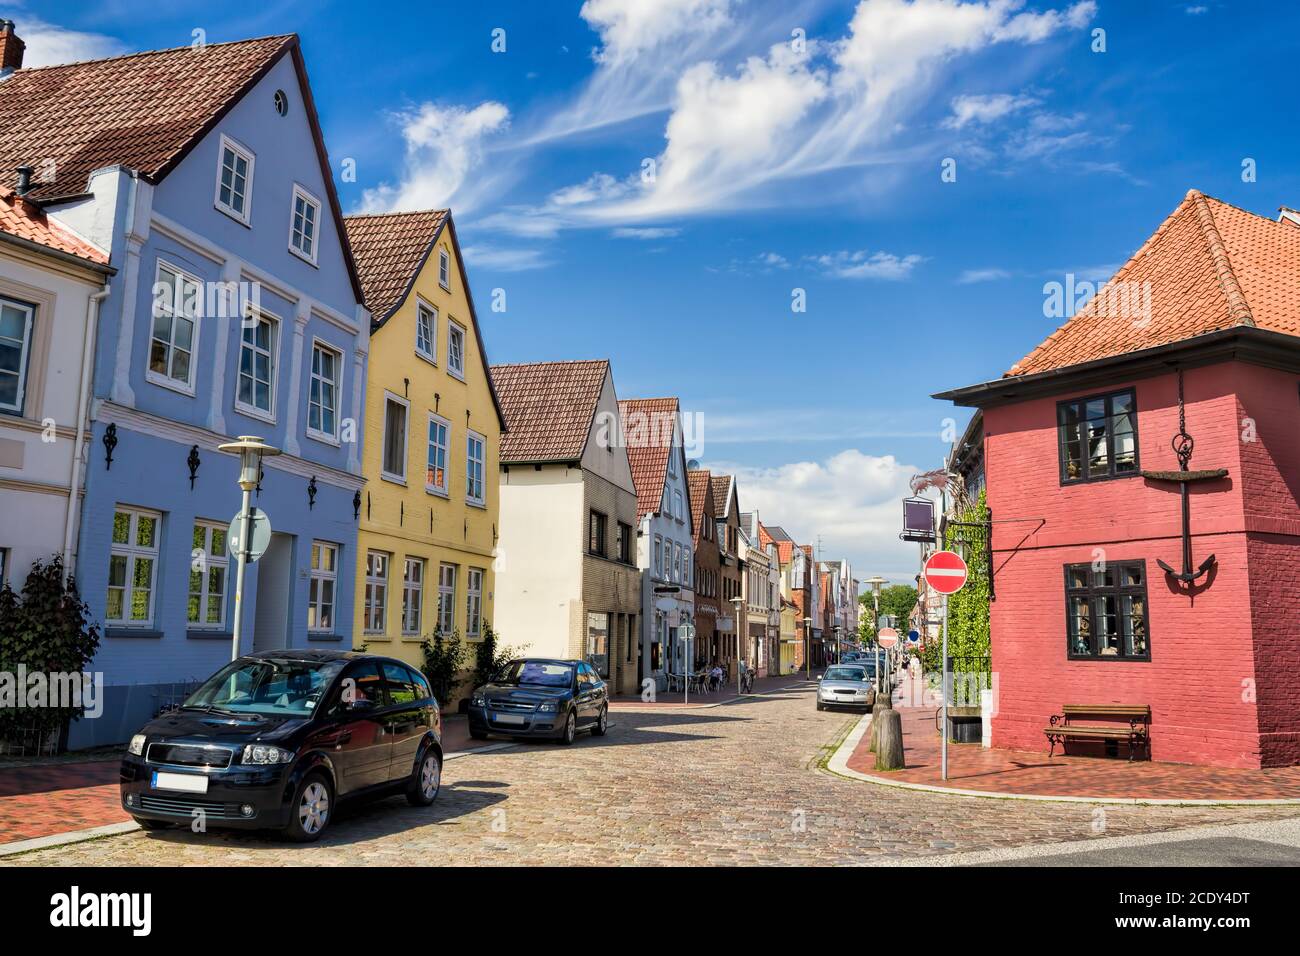 old town of Glückstadt in Germany Stock Photo